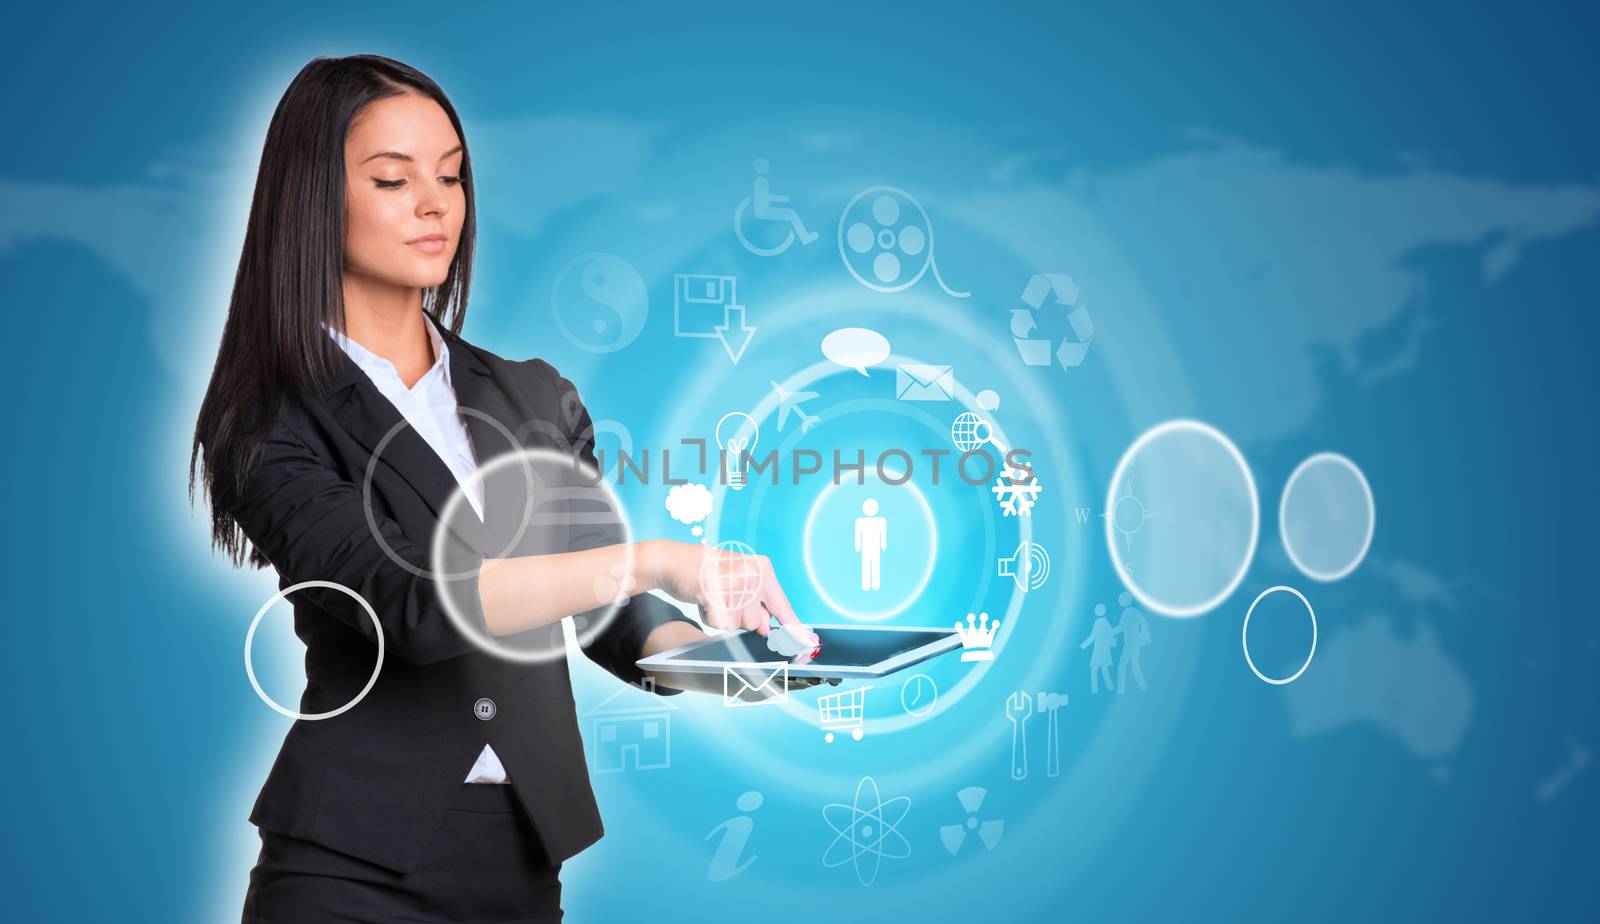 Beautiful businesswomen in suit using digital tablet. World map with circles and icons